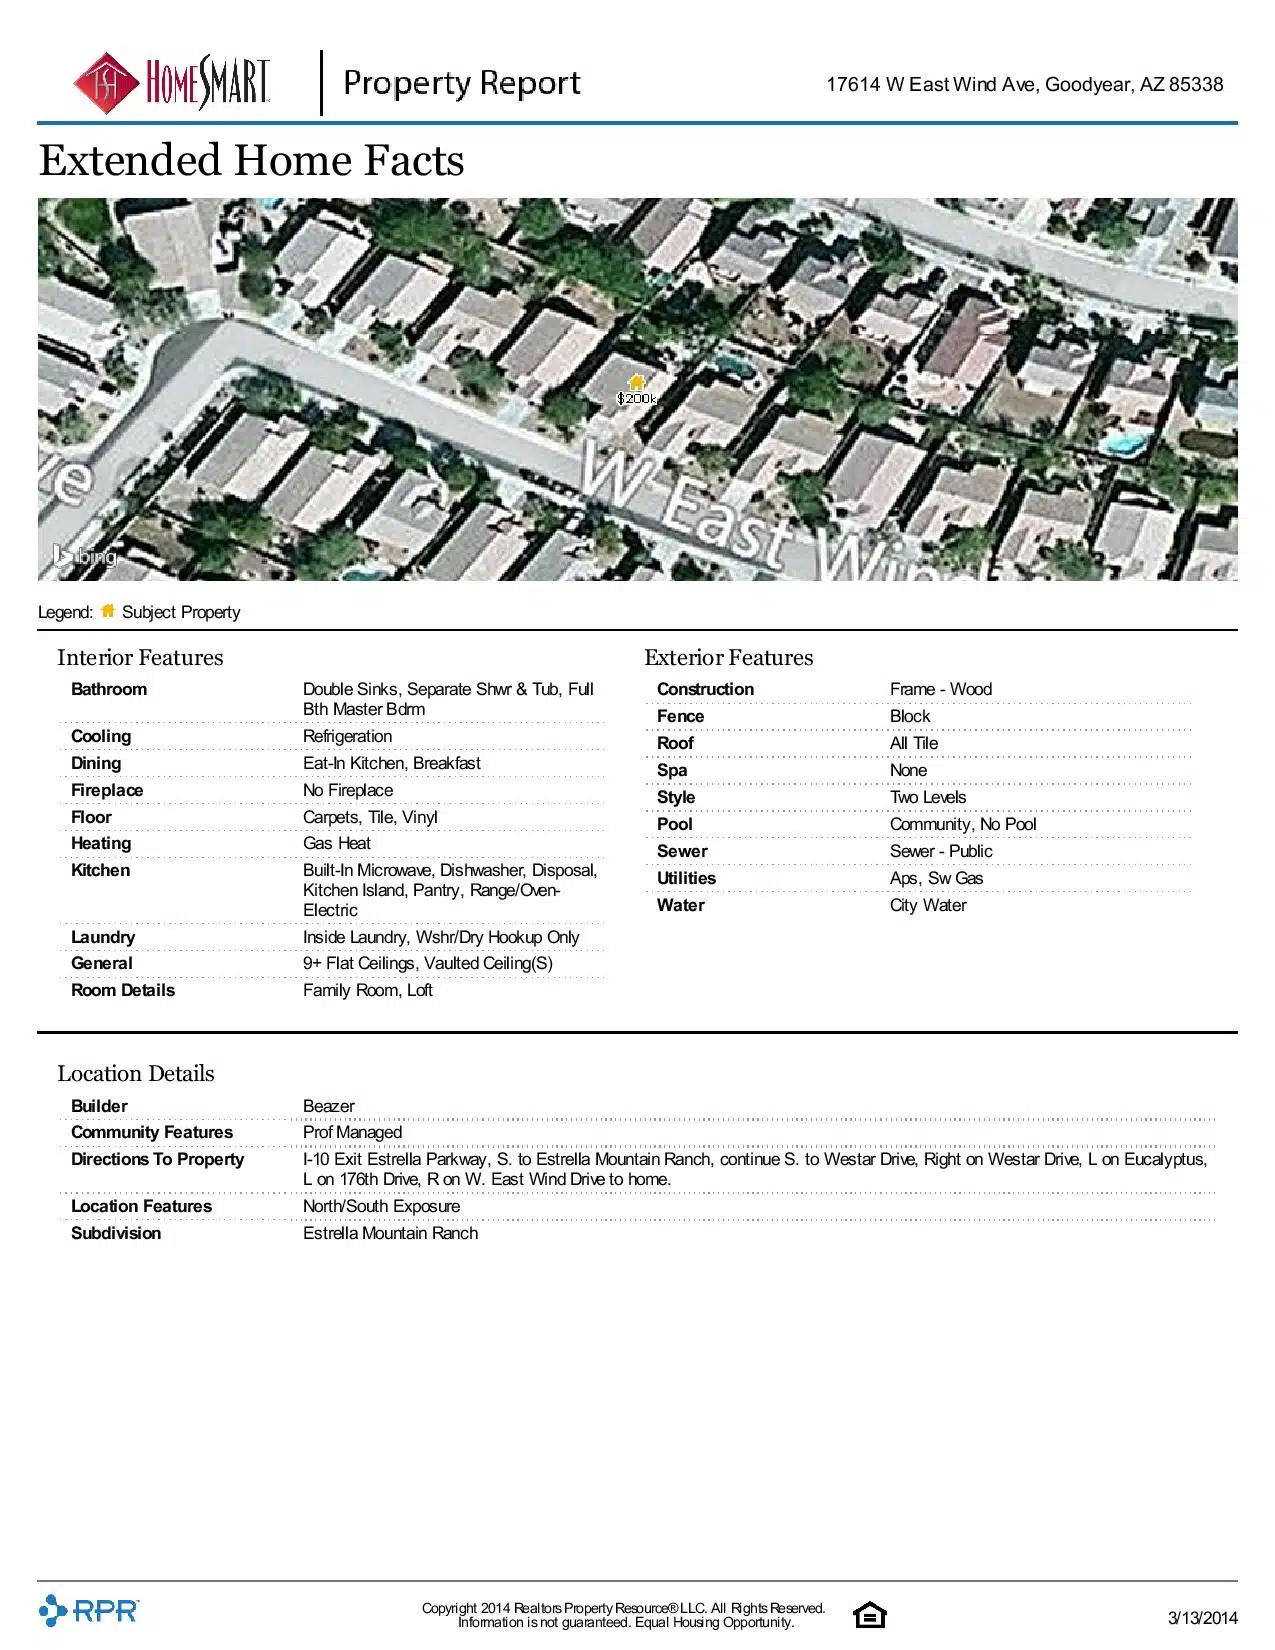 17614-W-East-Wind-Ave-Goodyear-AZ-85338-page-004